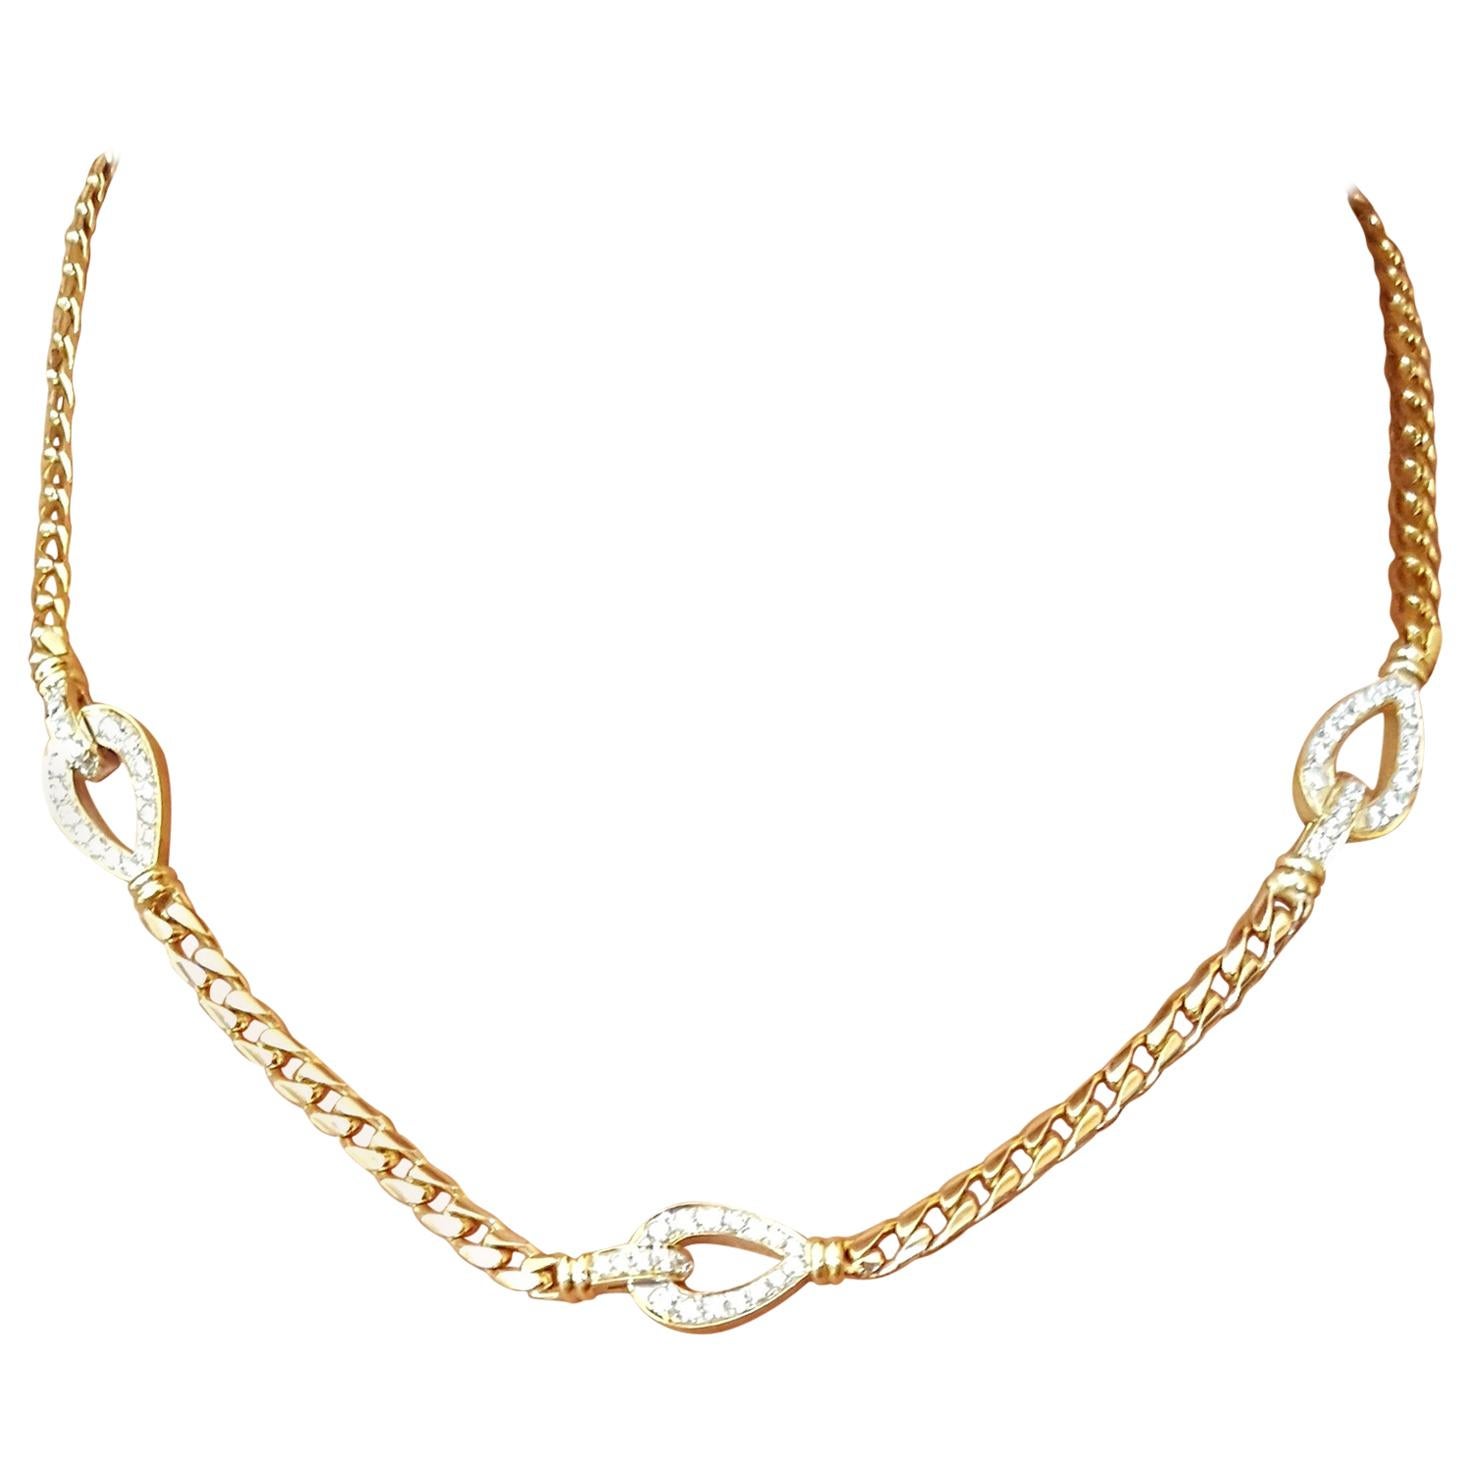 18kt Yellow Gold 1.77cttw Diamond Curb Link Necklace, 46 gr, 19 In, Solid Heavy